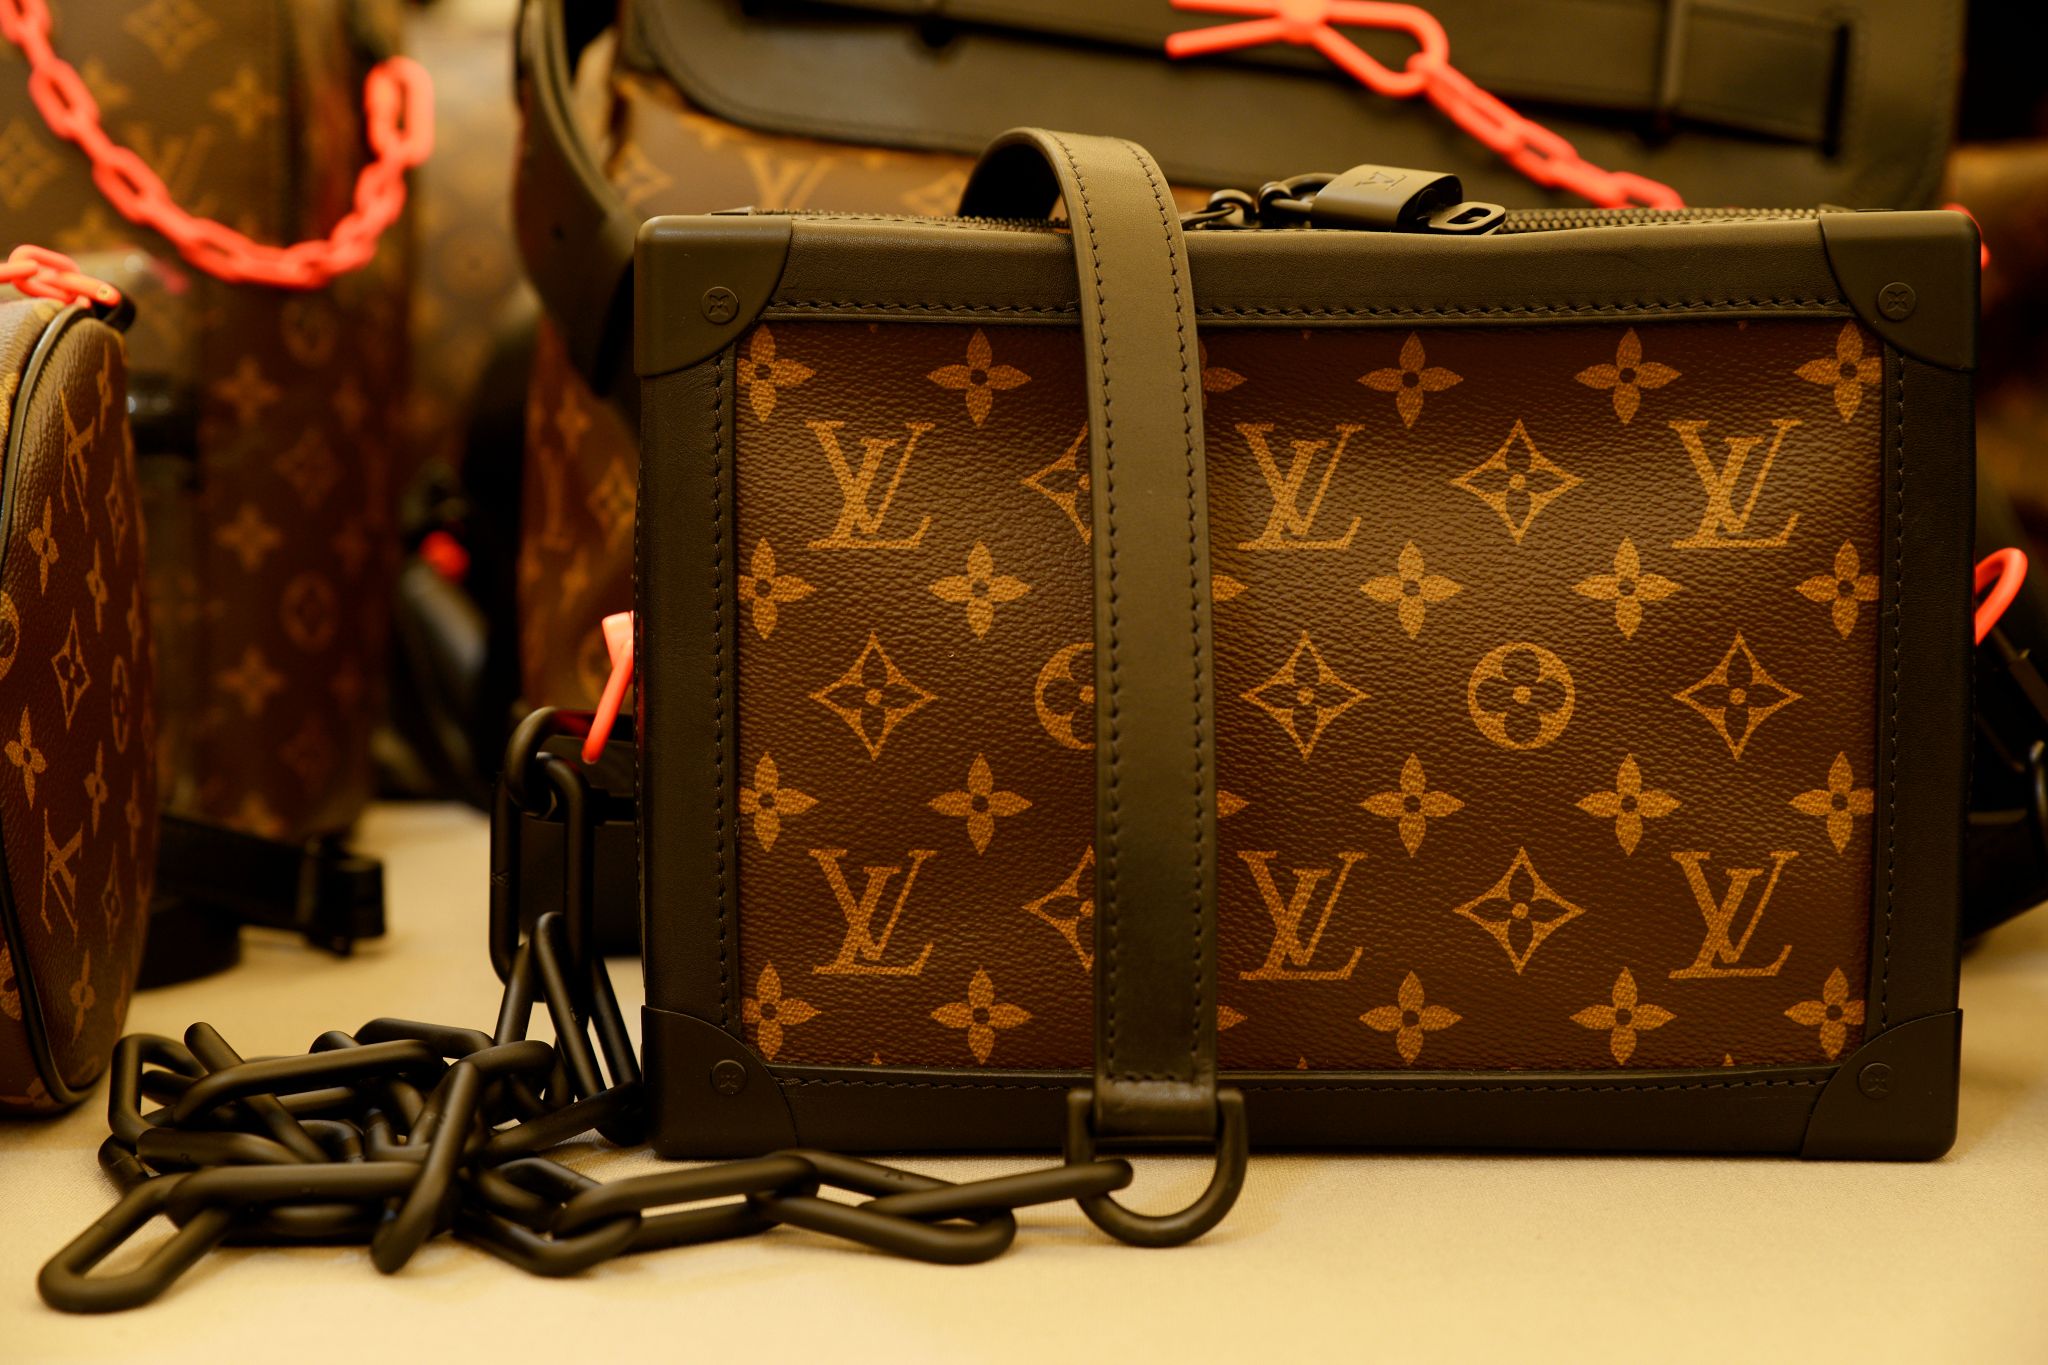 Thieves Stole 3 Days Worth Of Louis Vuitton Shipments By Lying To UPS